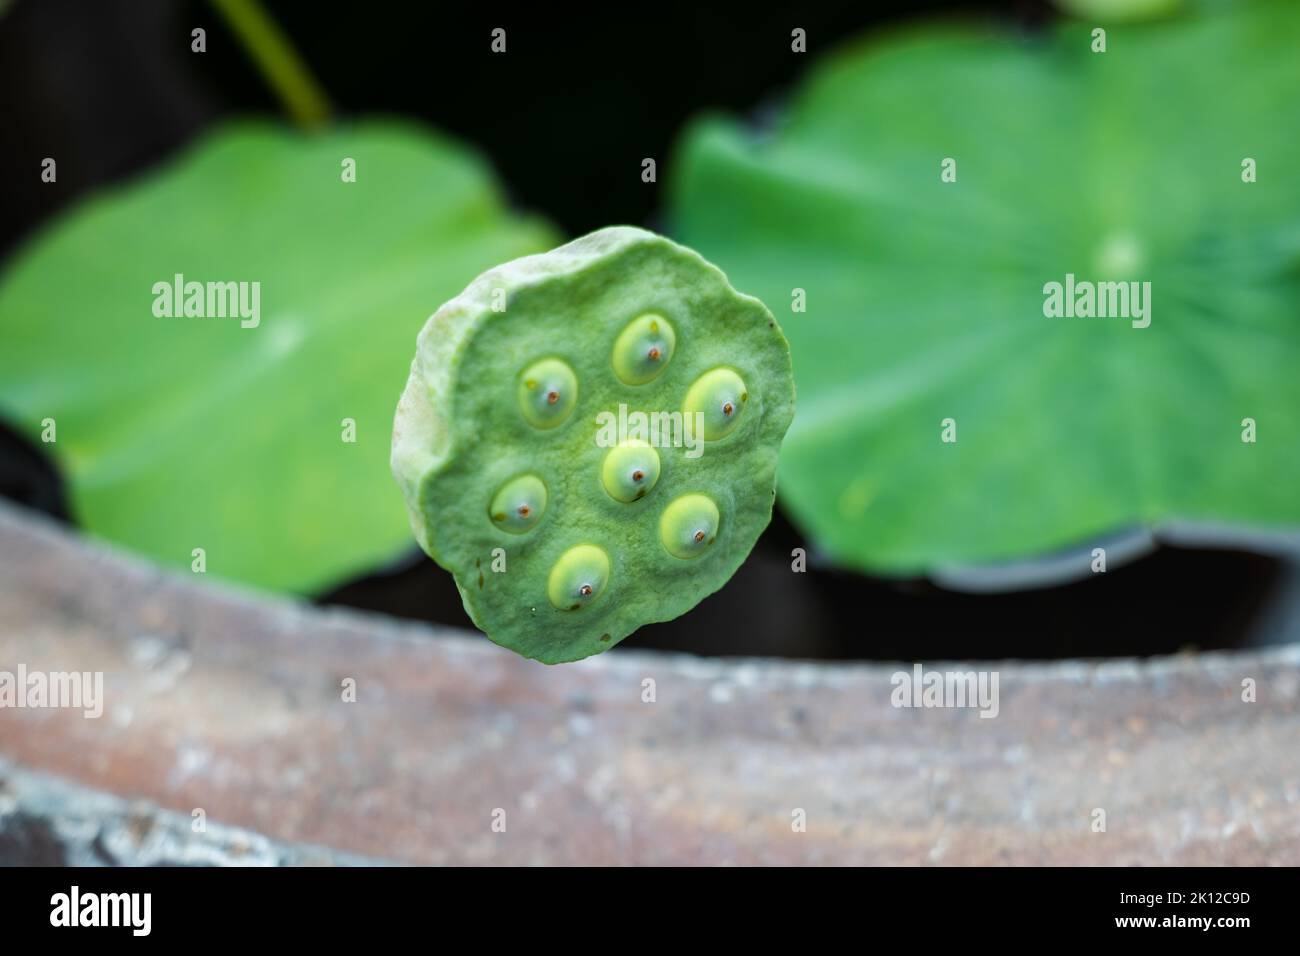 Lotus Pod - close-up of pod of lotus flower with seeds inside. Stock Photo